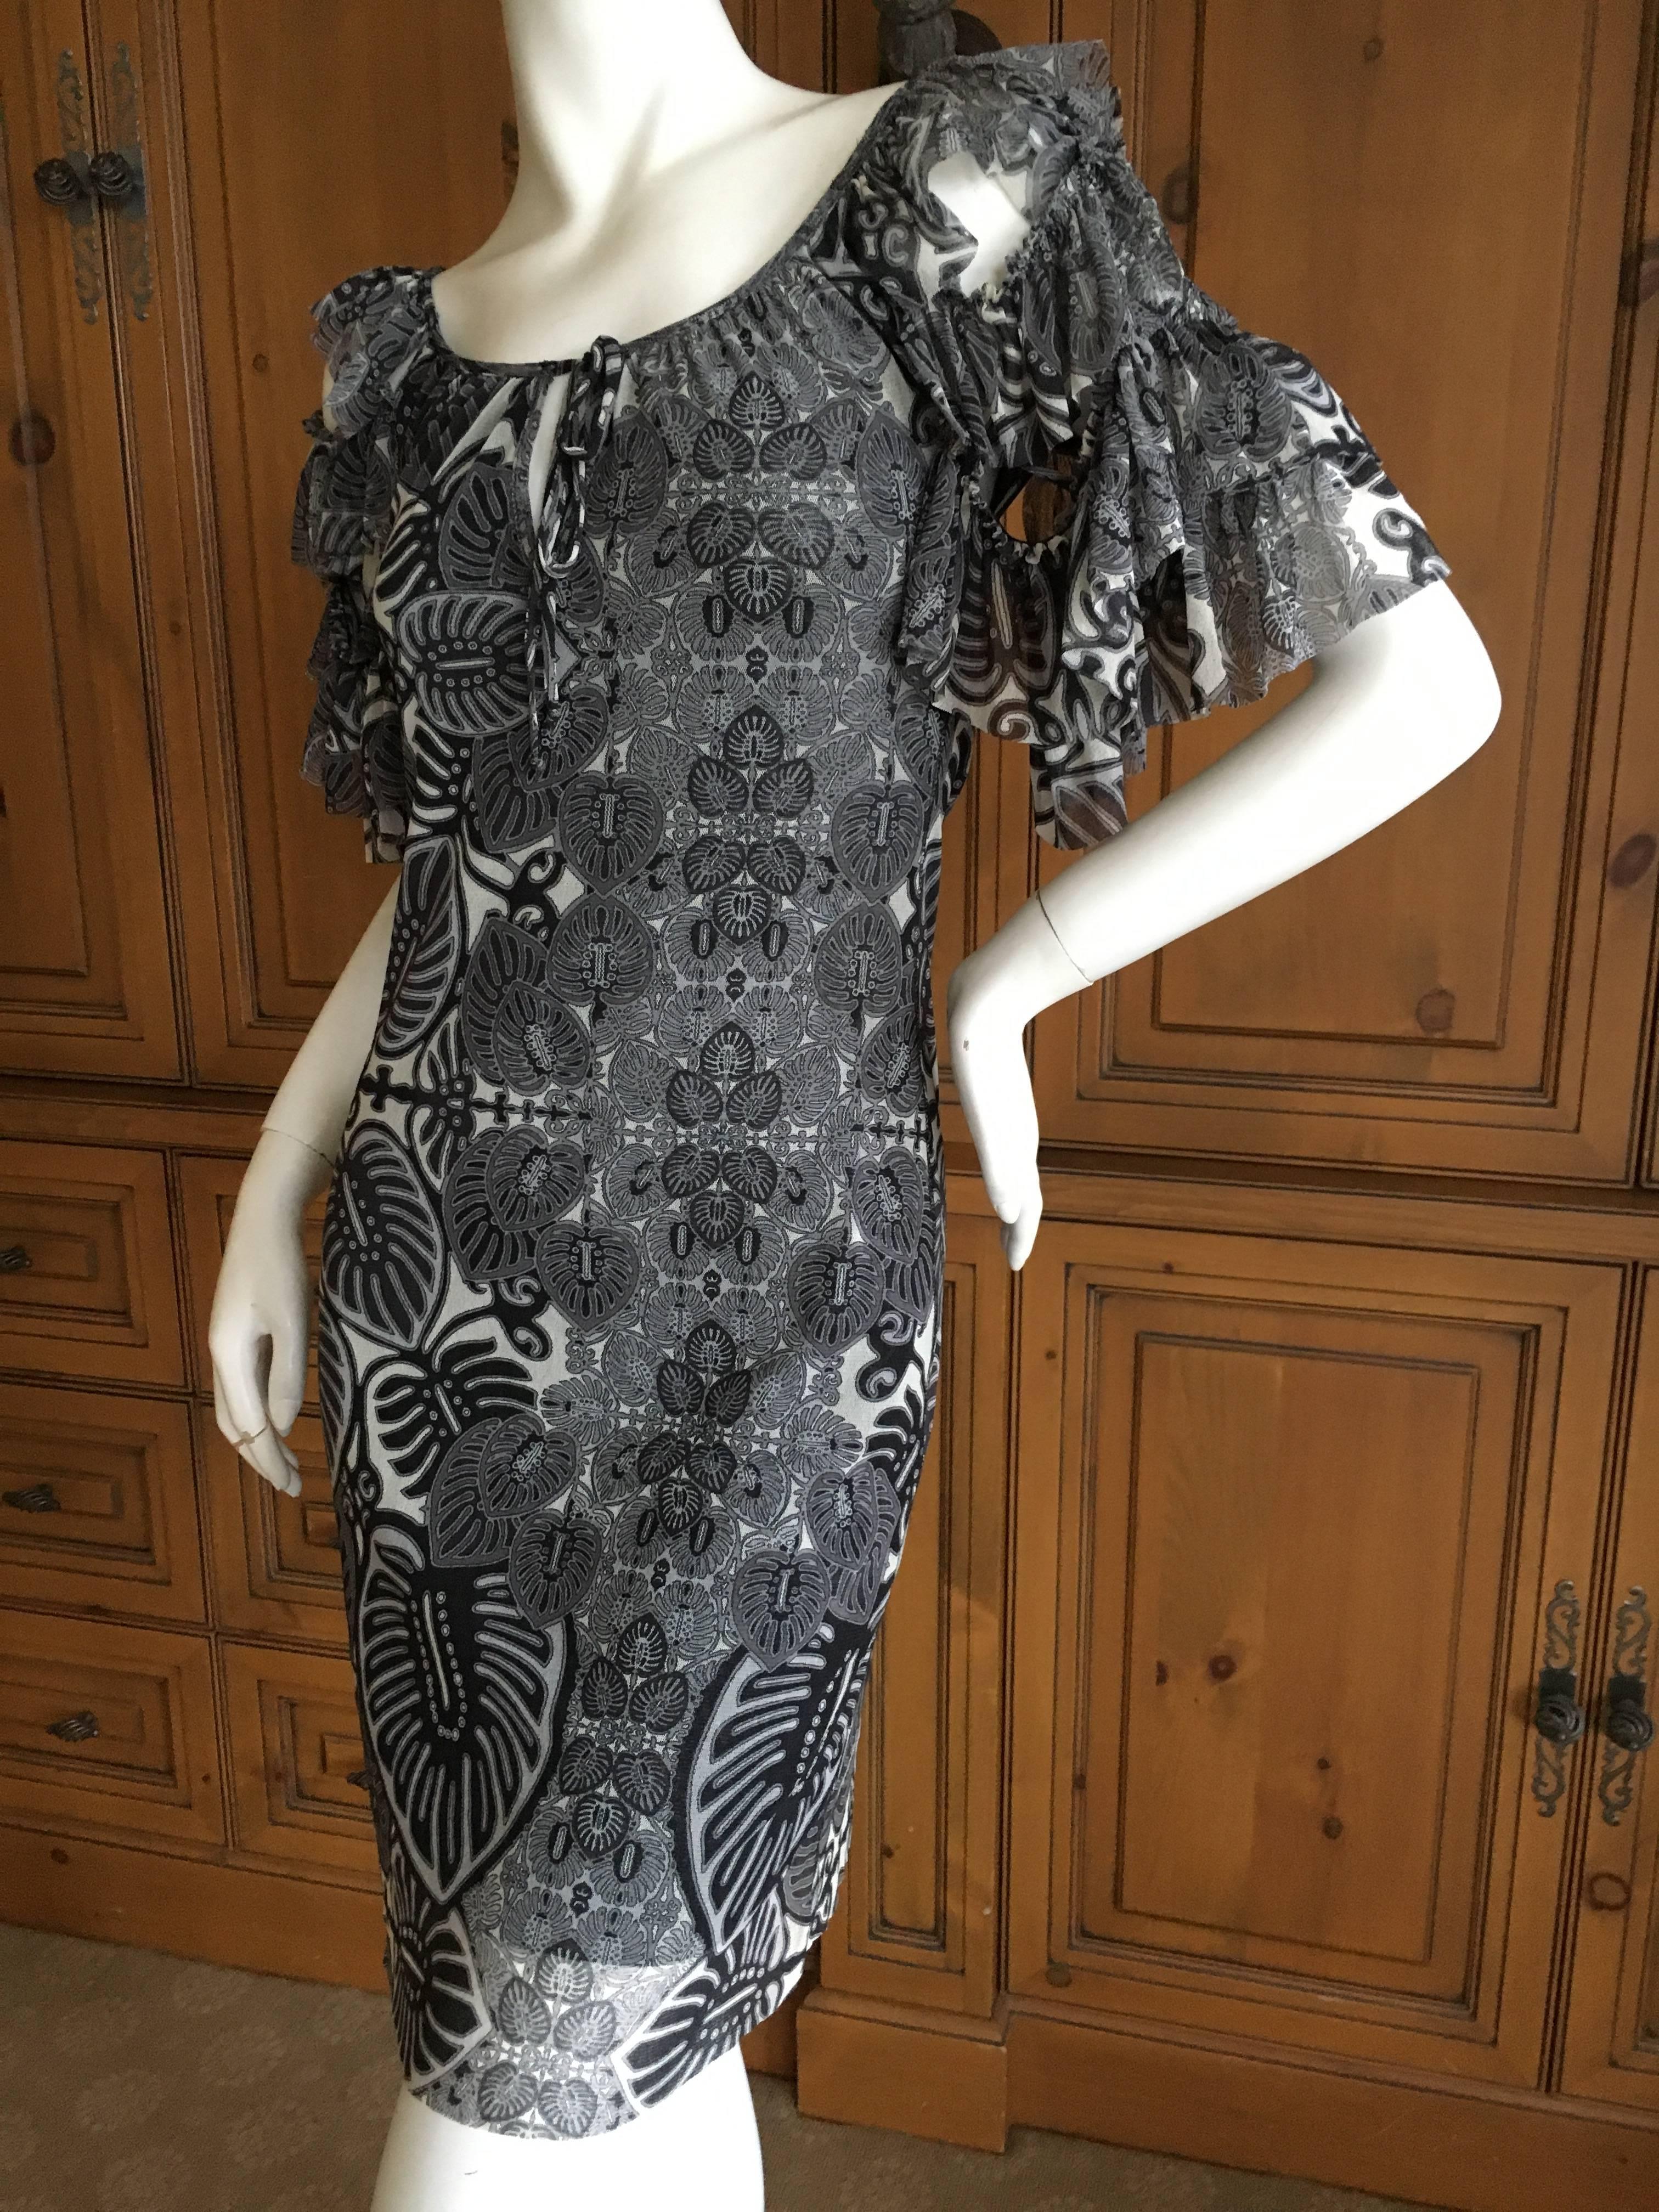 Jean Paul Gaultier Soleil  Dress with Ruffle Sleeves by Fuzzi In Excellent Condition For Sale In Cloverdale, CA